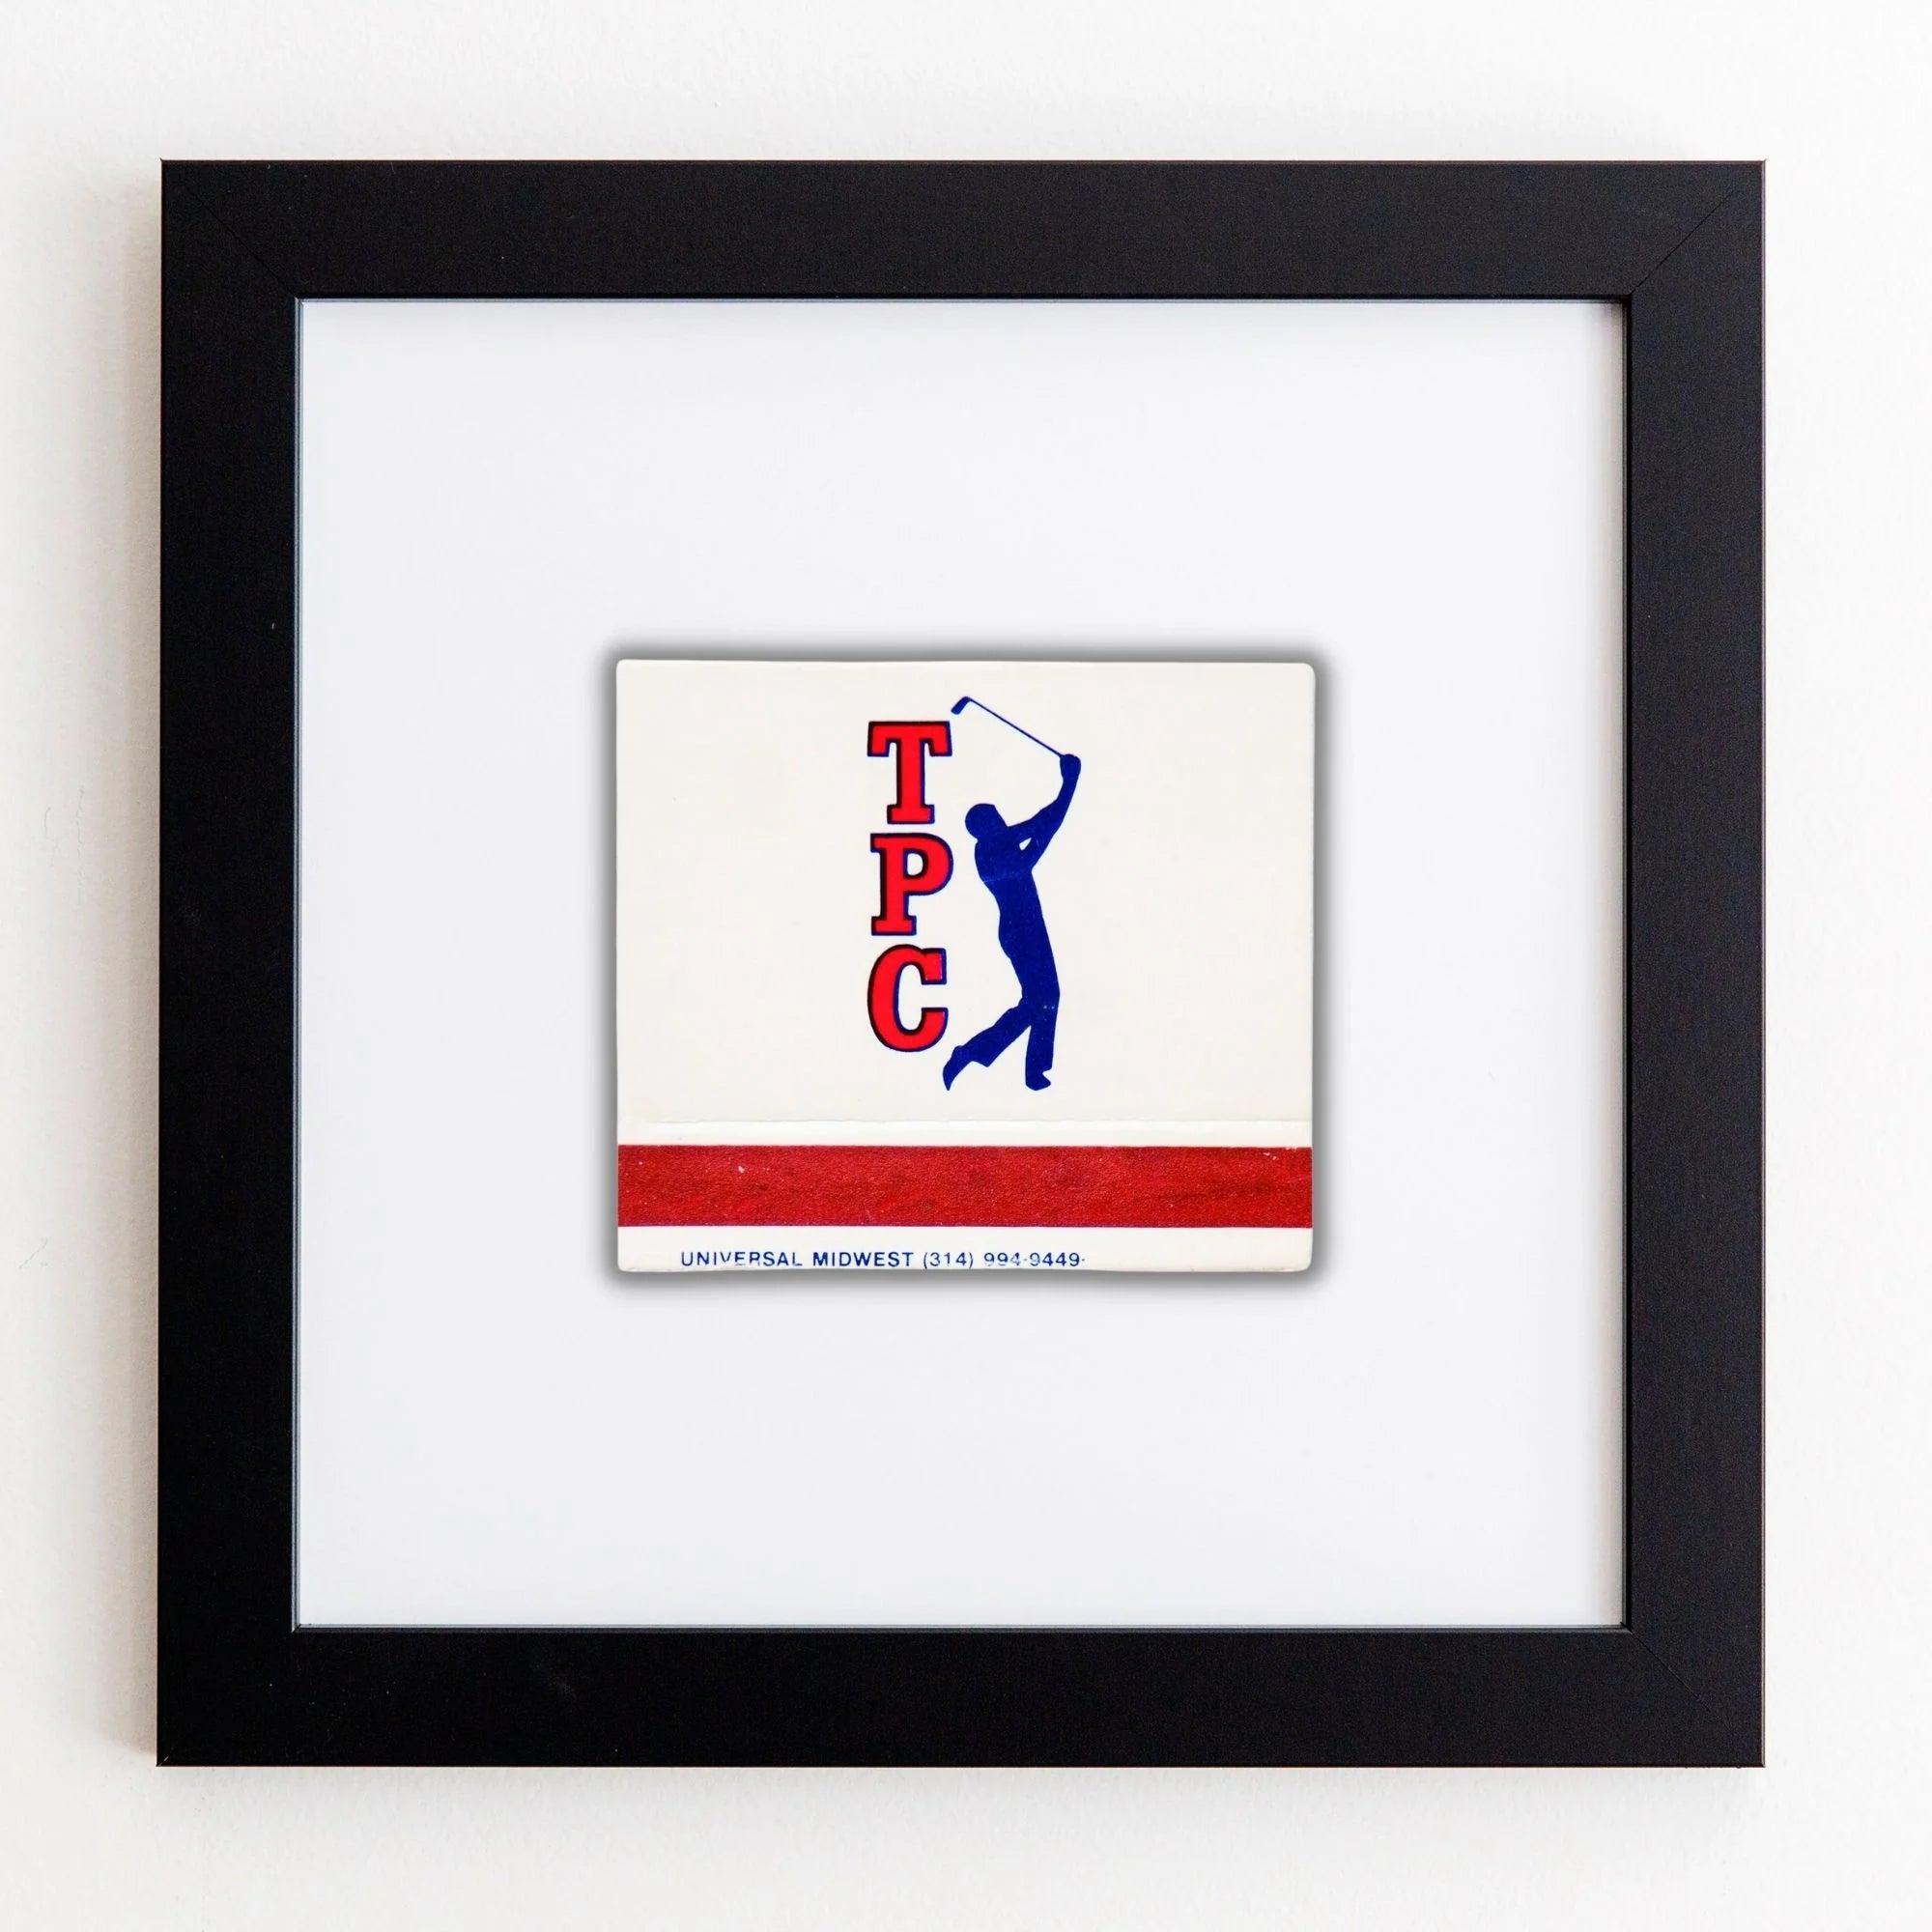 A framed acrylic print featuring a blue silhouette of a golfer in mid-swing, with the letters &quot;TPC&quot; in red and black and the text &quot;UNIVERSAL MIDWEST 06-21-3429&quot; below, displayed in an Art Square Black Frame by Match South.